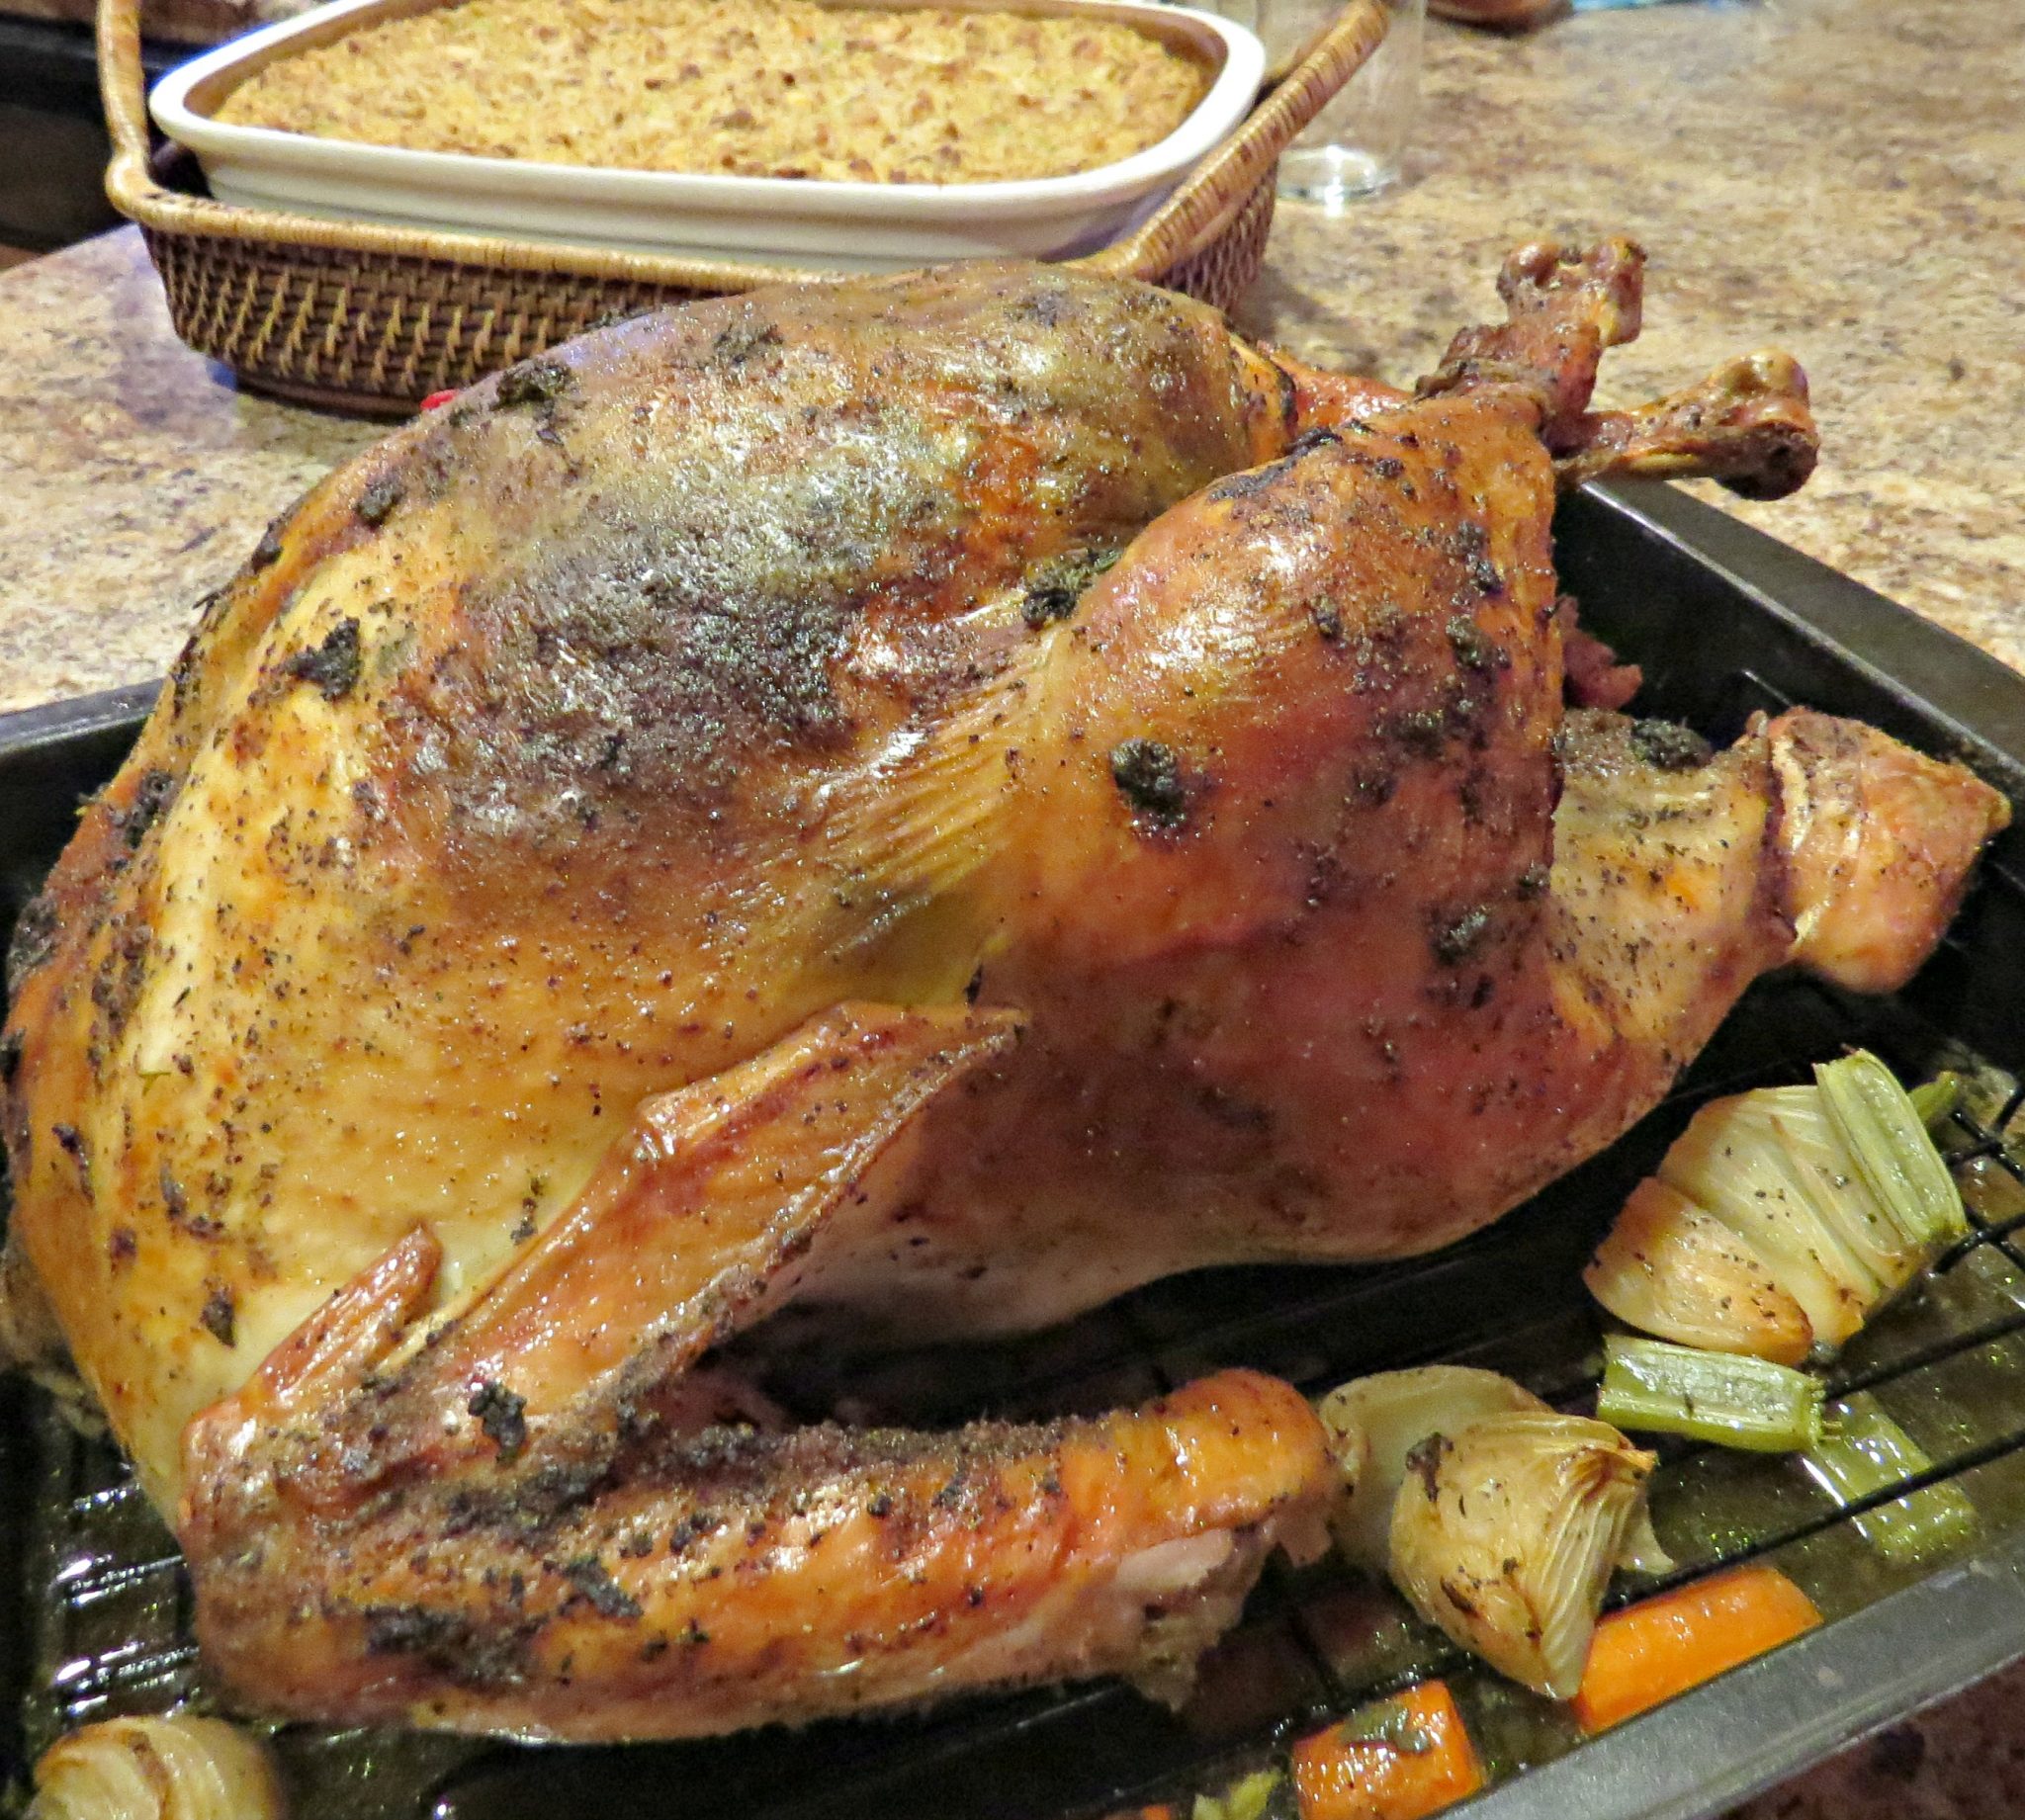 How To Bake A Turkey That's Moist and Delicious - Written Reality